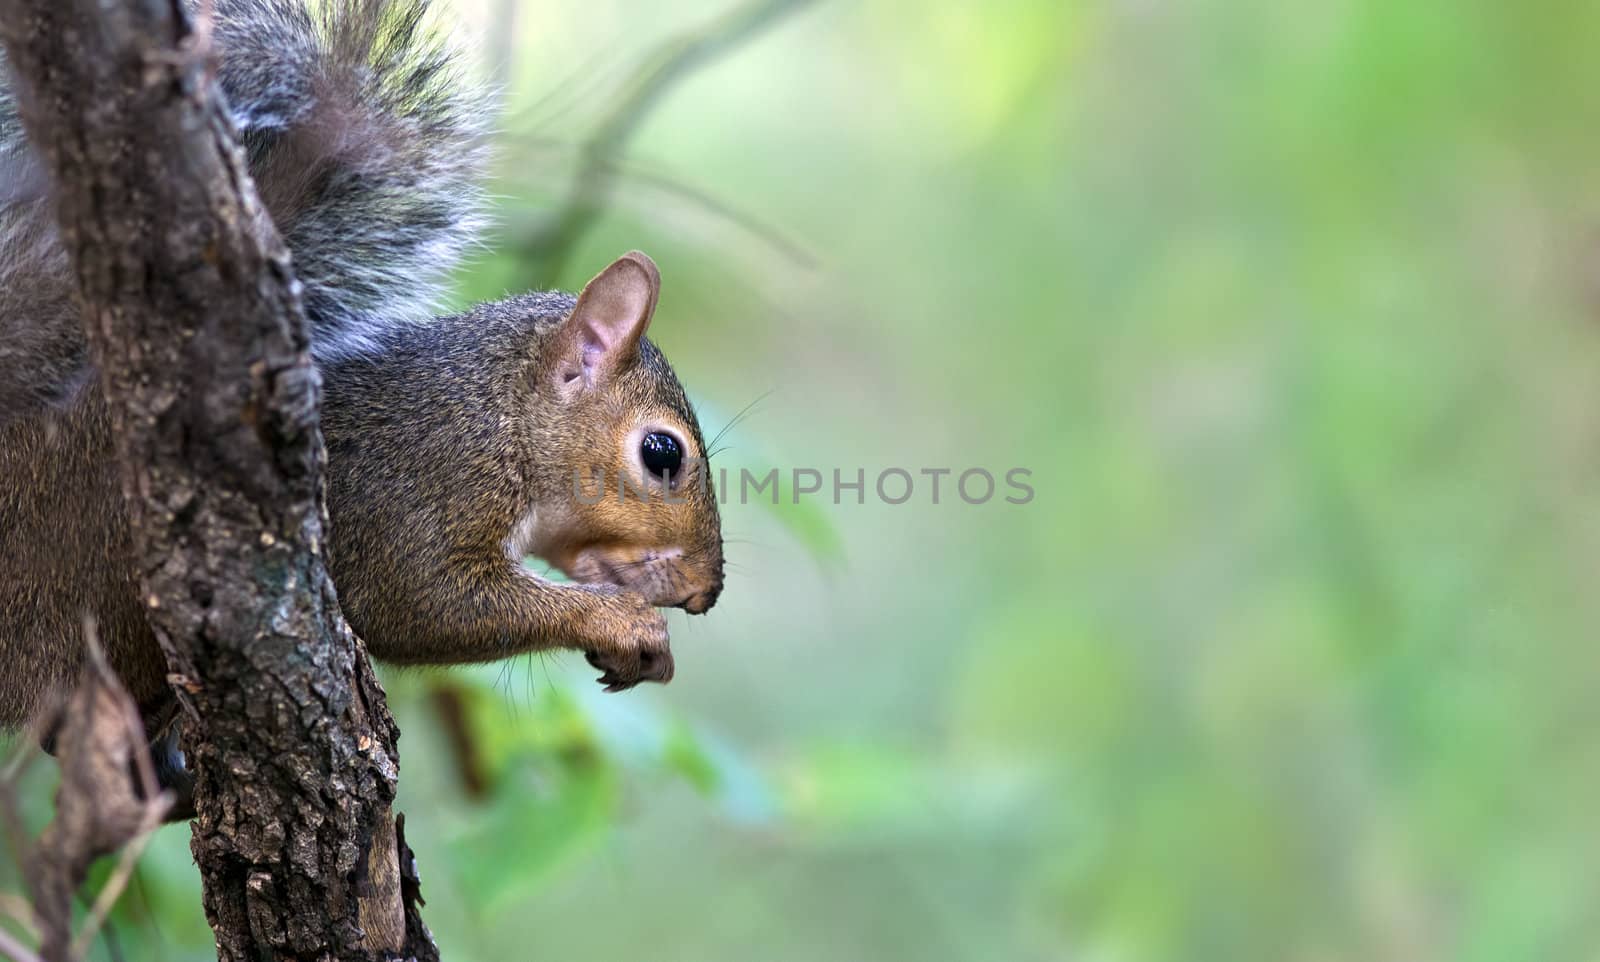 A close up shot of a Eastern Gray Squirrel (Sciurus carolinensis) eating from a branch in a tree.